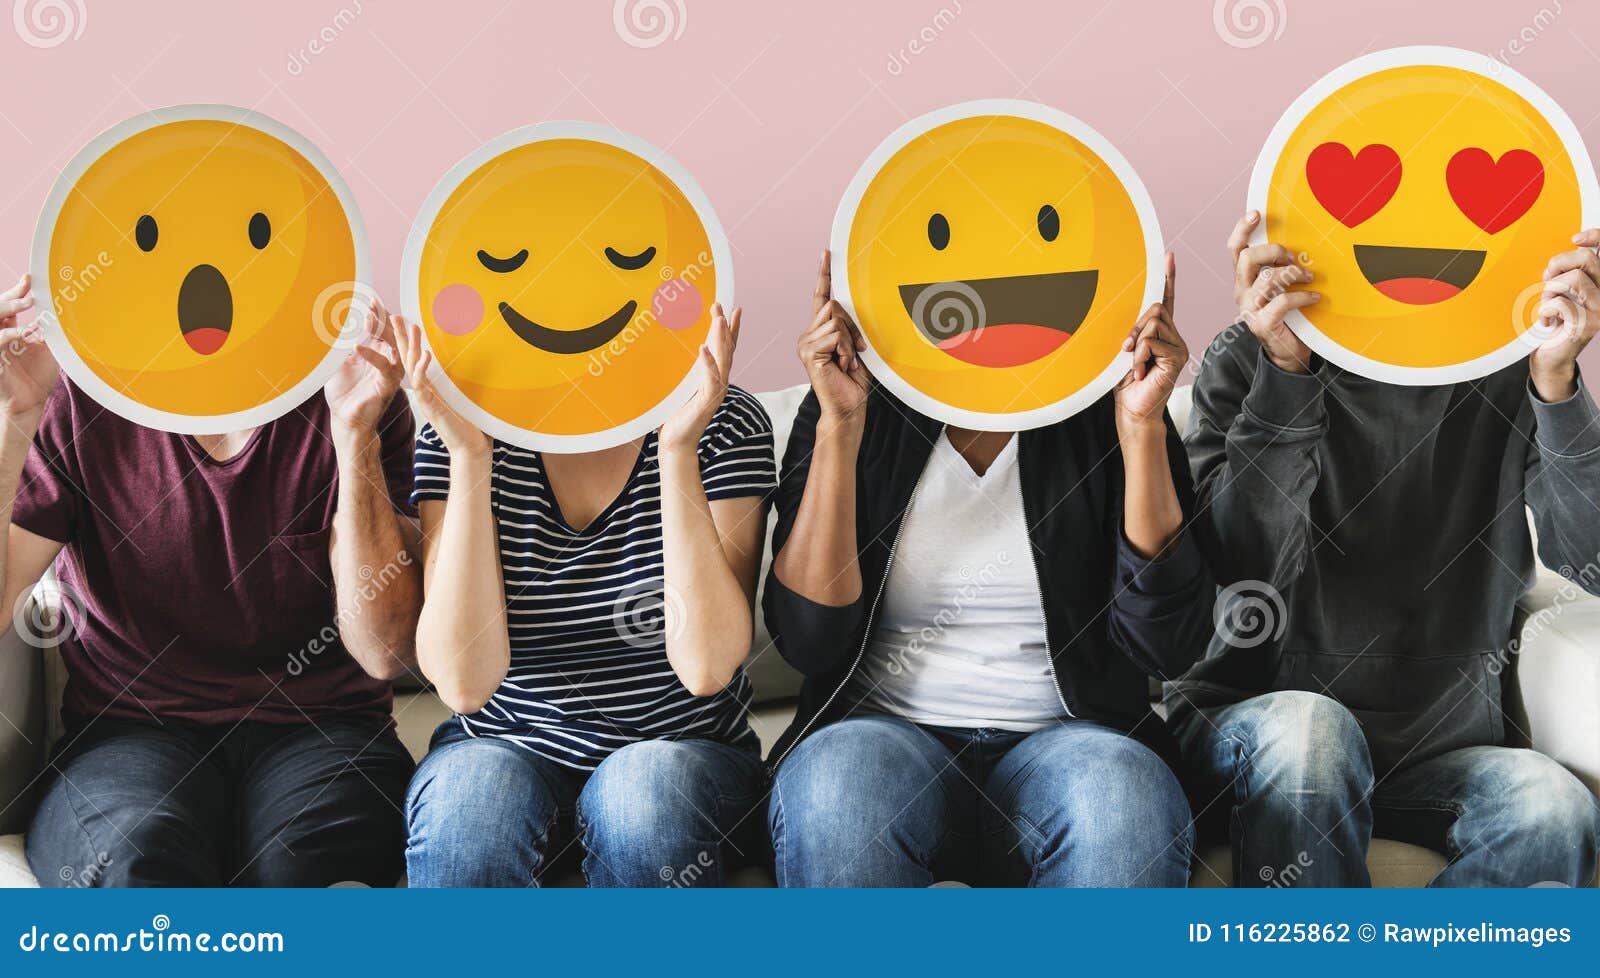 diverse people covered with emoticons